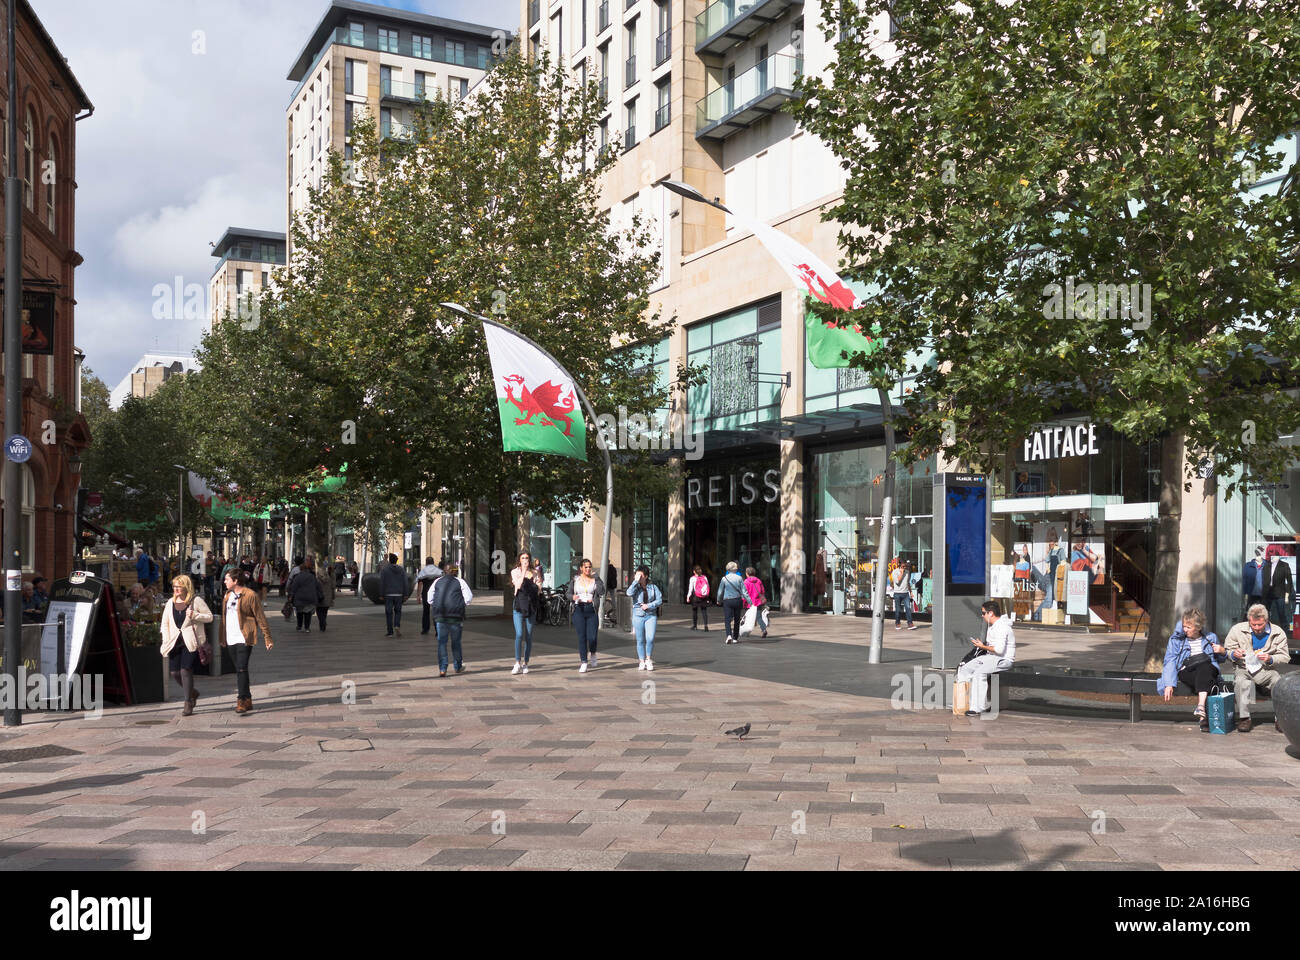 Dh die Hayes CARDIFF WALES Menschen in city center Square Stockfoto